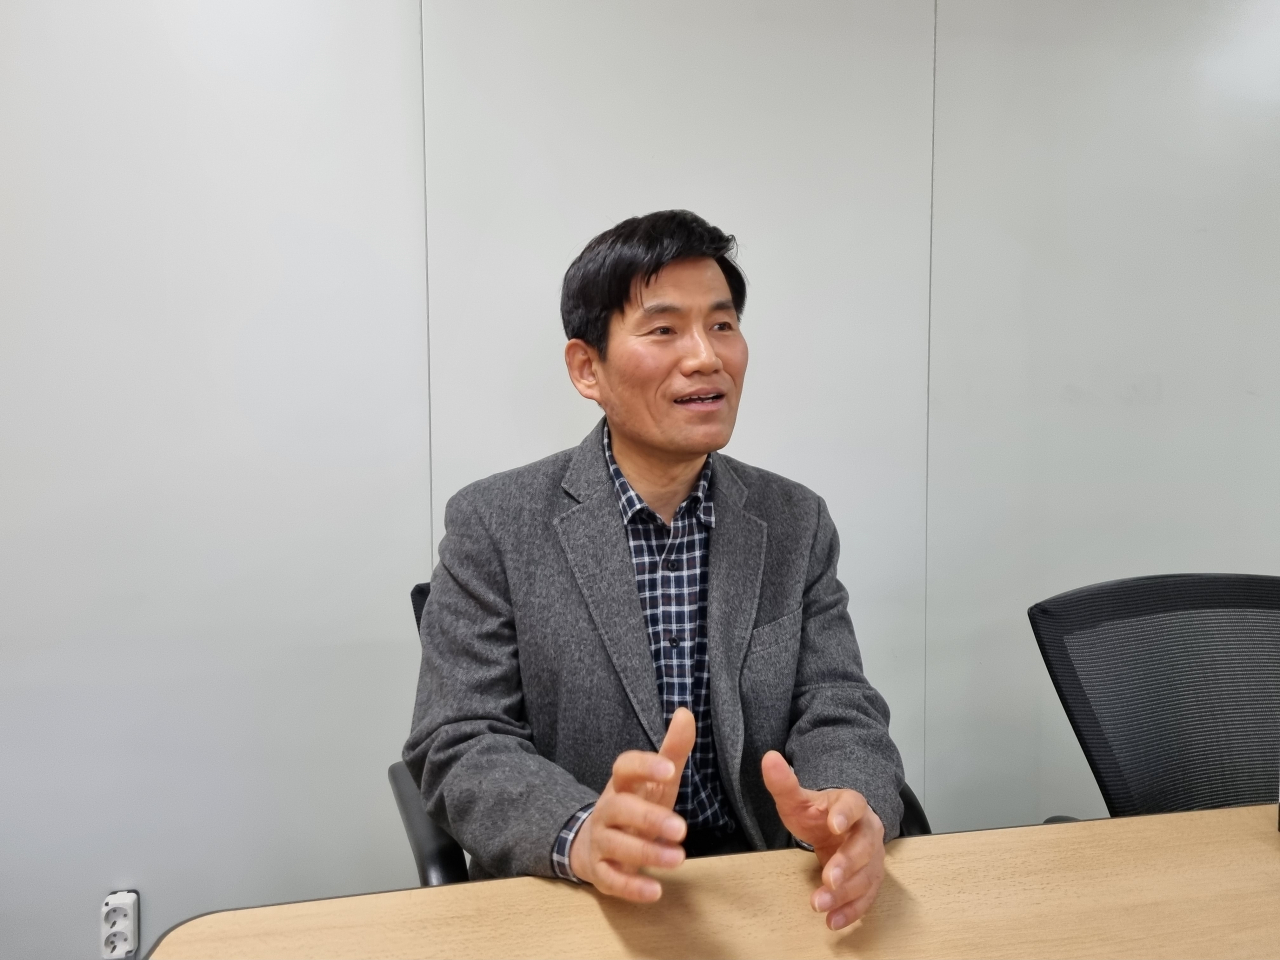 Lee Joon, executive director of the Korea Aerospace Research Institute’s strategy and planning directorate, speaks in an interview with The Korea Herald on Feb. 14 at the KARI in Daejeon. (Kan Hyeong-woo/The Korea Herald)